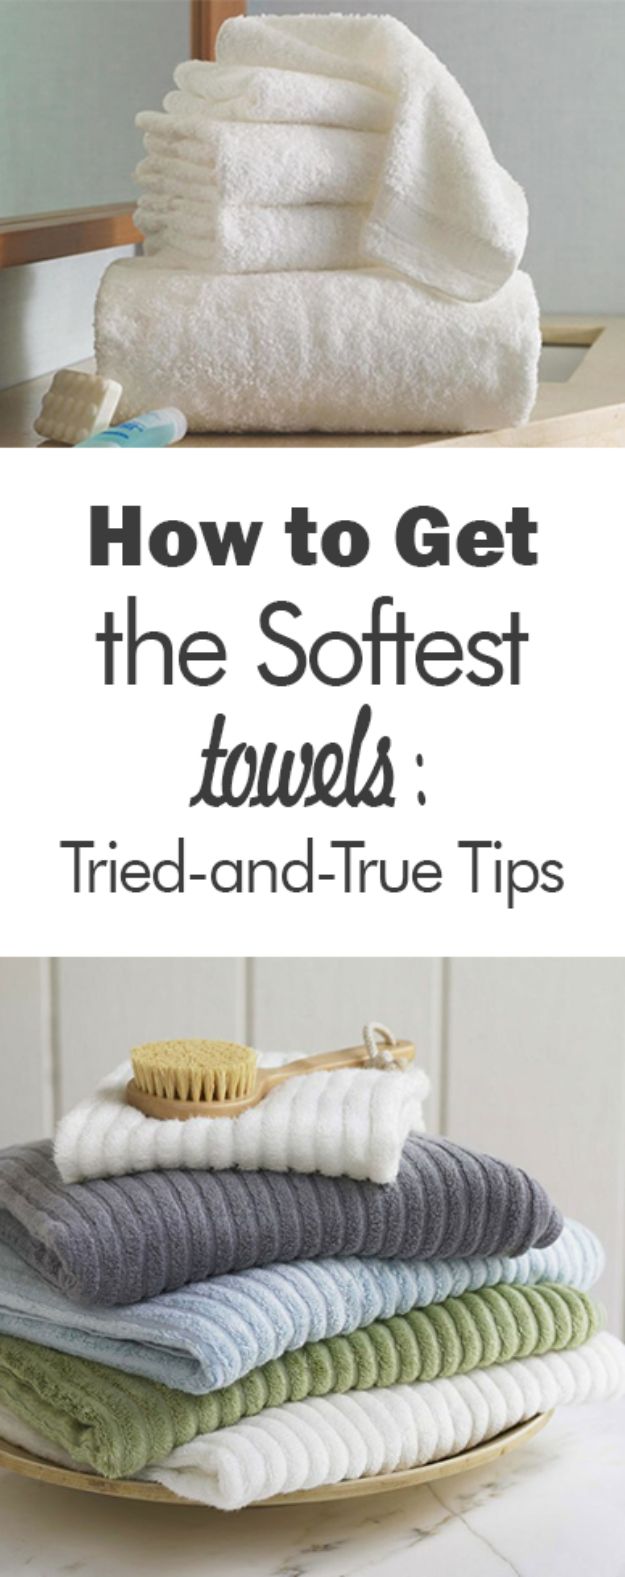 Laundry Hacks - Get the Softest Towels - Cool Tips for Busy Moms and Laundry Lifehacks - Laundry Room Organizing Ideas, Storage and Makeover - Folding, Drying, Cleaning and Stain Removal Tips for Clothes - How to Remove Stains, Paint, Ink and Smells - Whitening Tricks and Solutions - DIY Products and Recipes for Clothing Soaps 